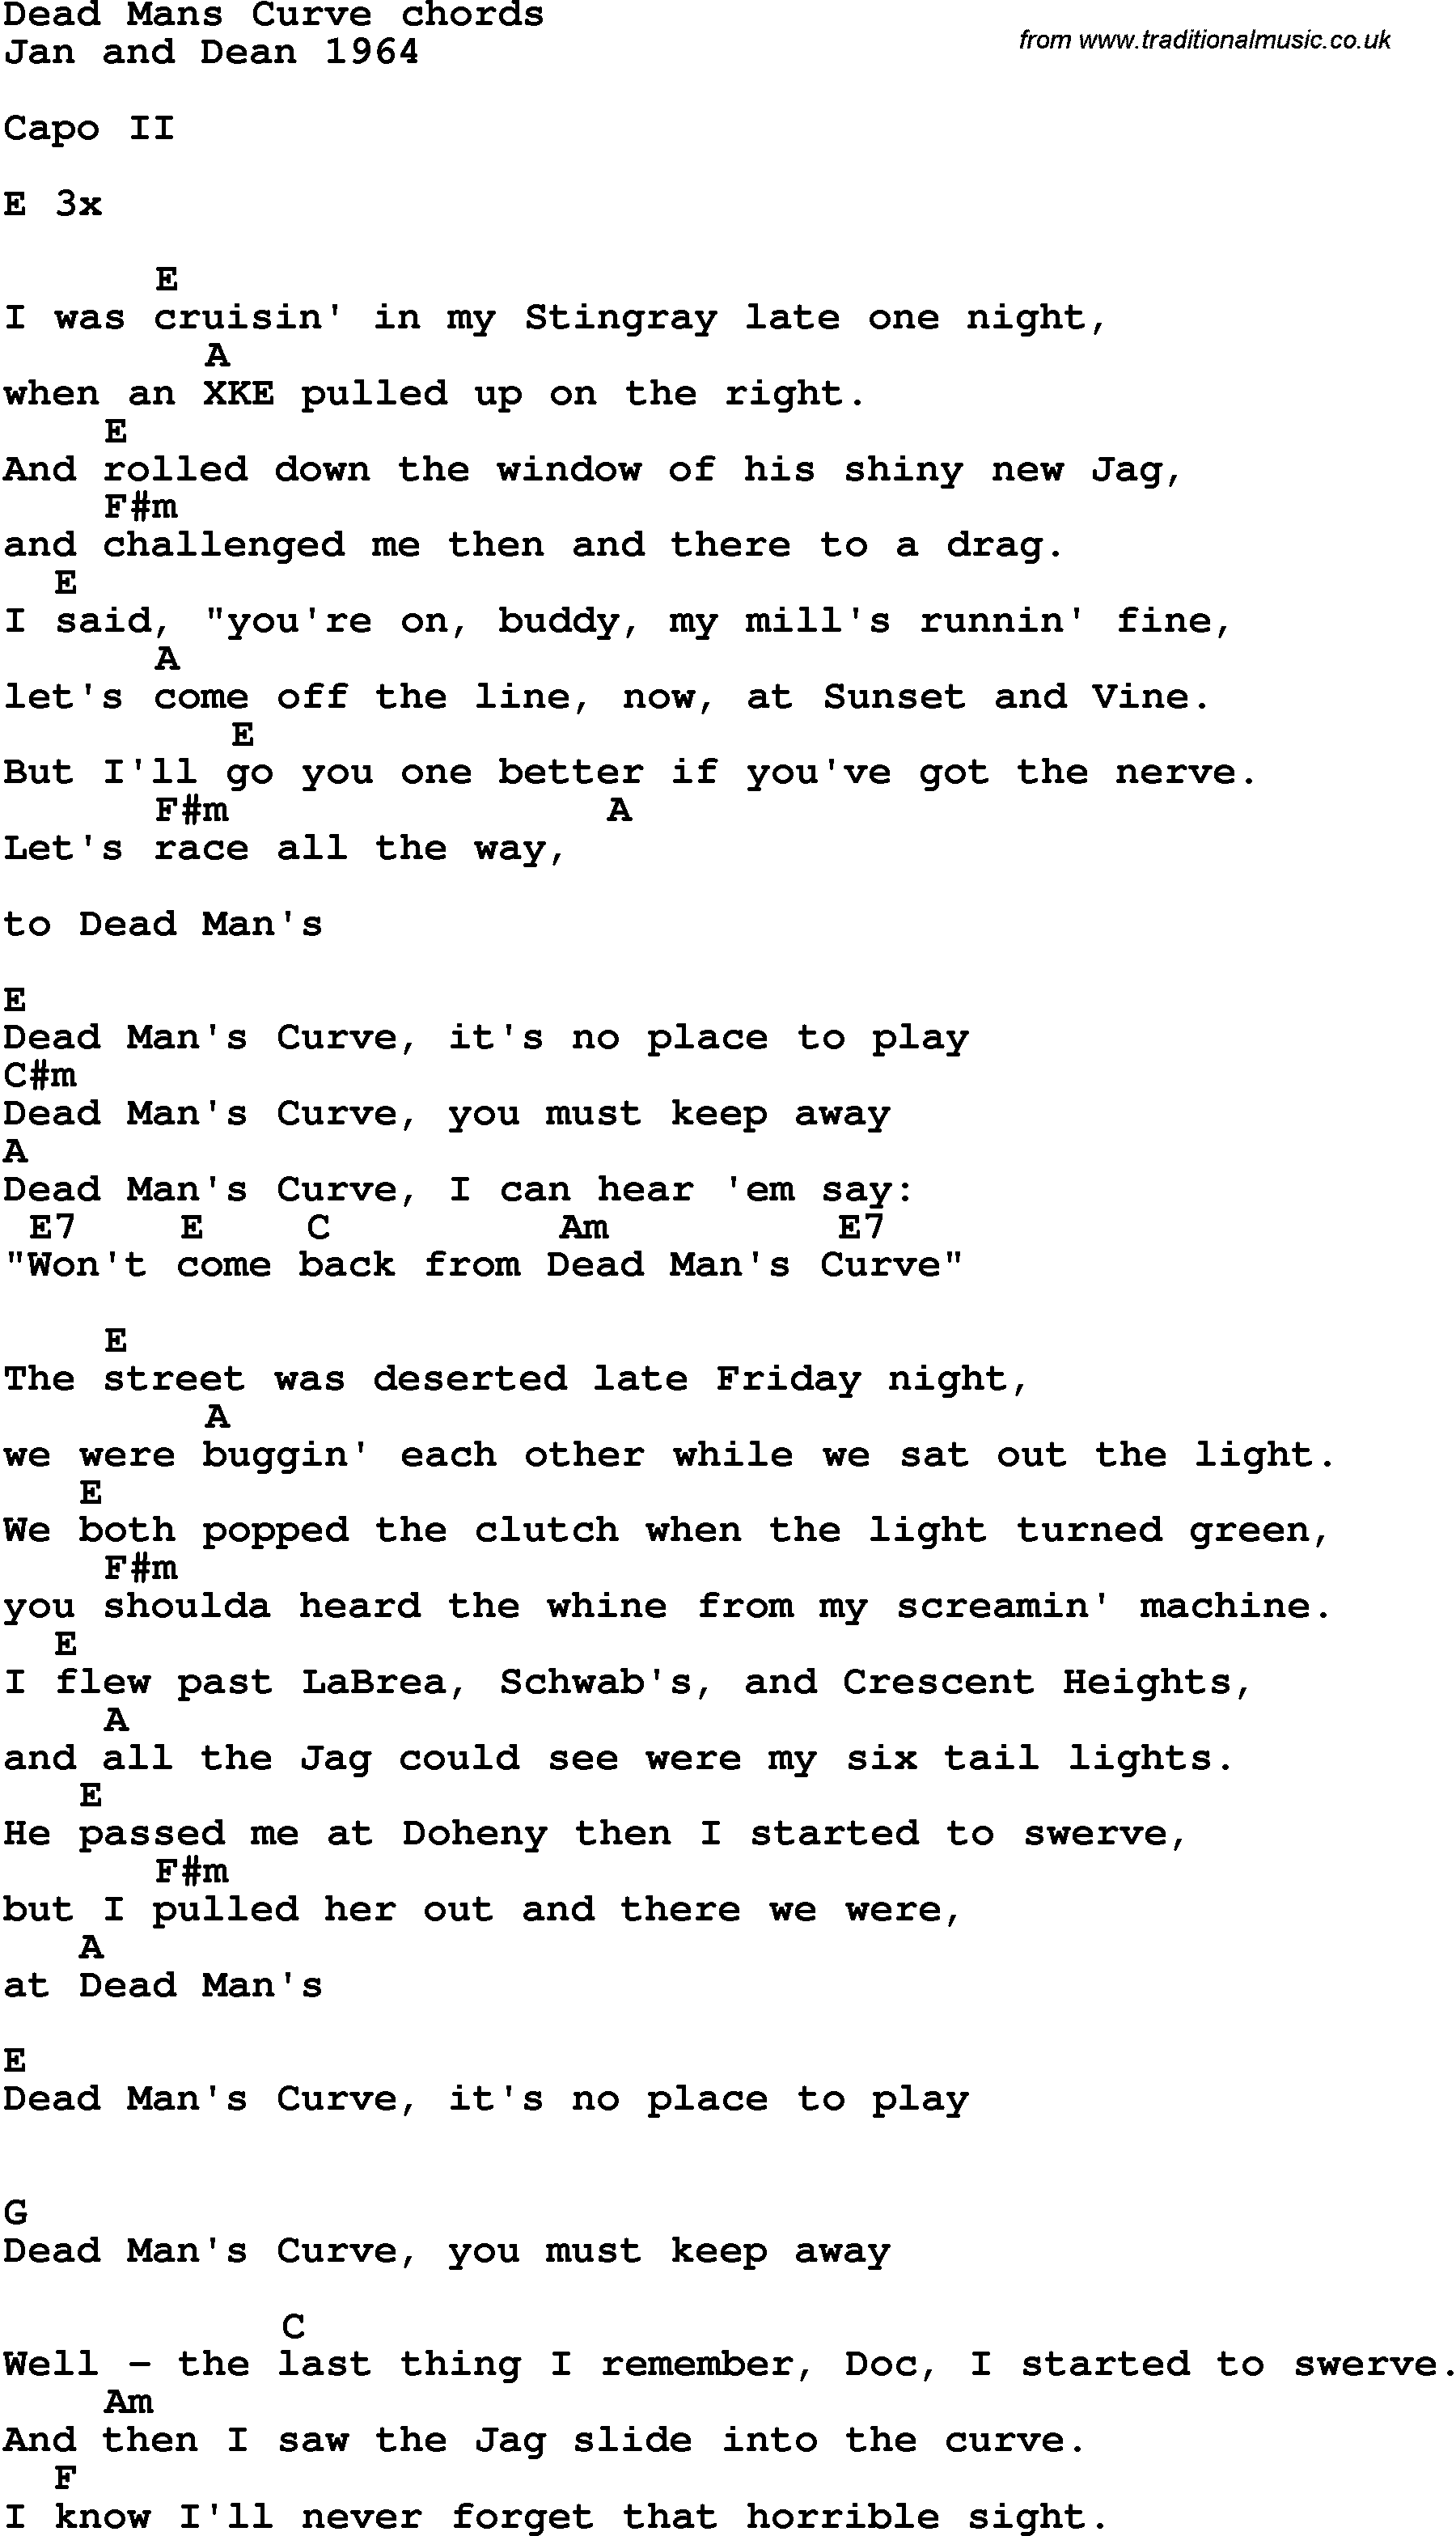 Song Lyrics with guitar chords for Dead Man's Curve